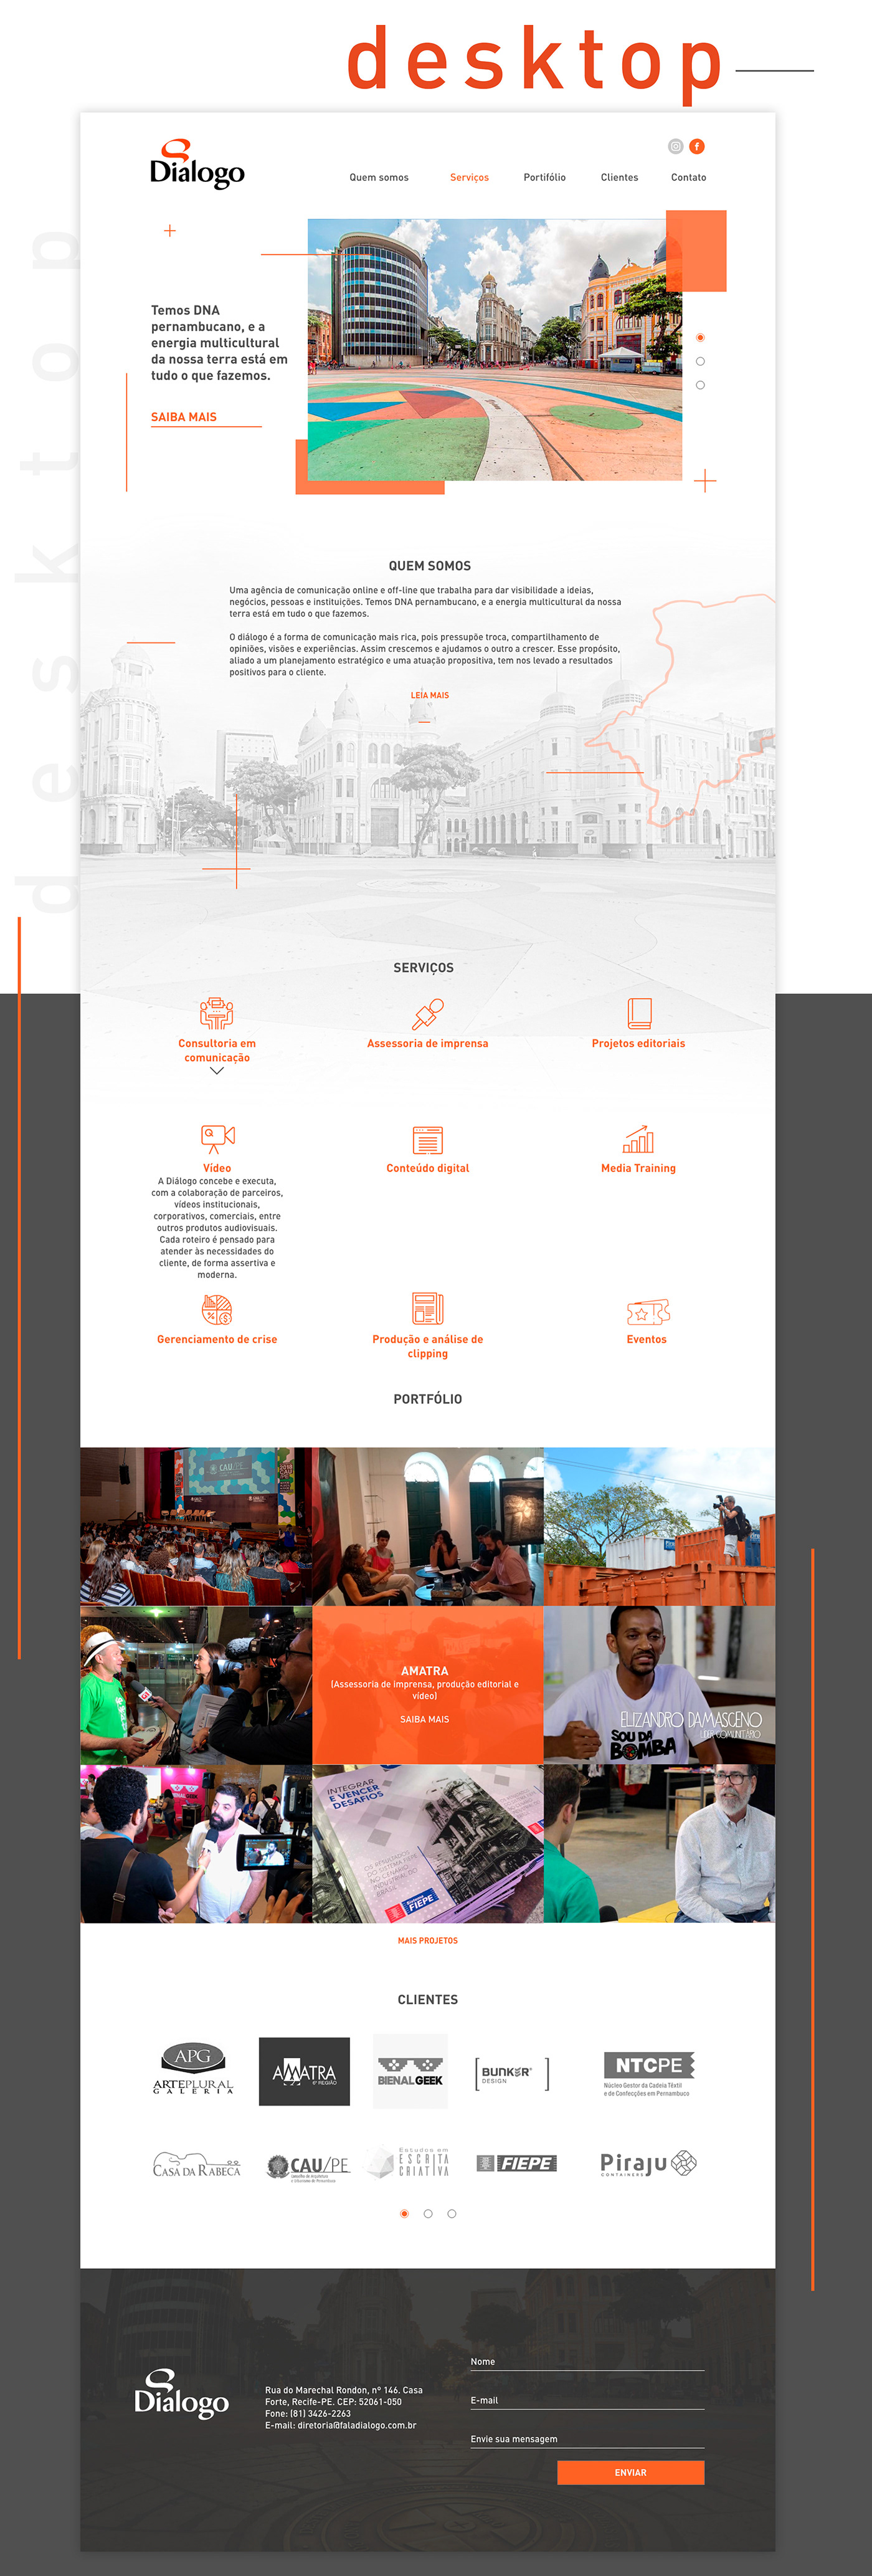 Interface UI ux site Web onepage design user Usability Experience